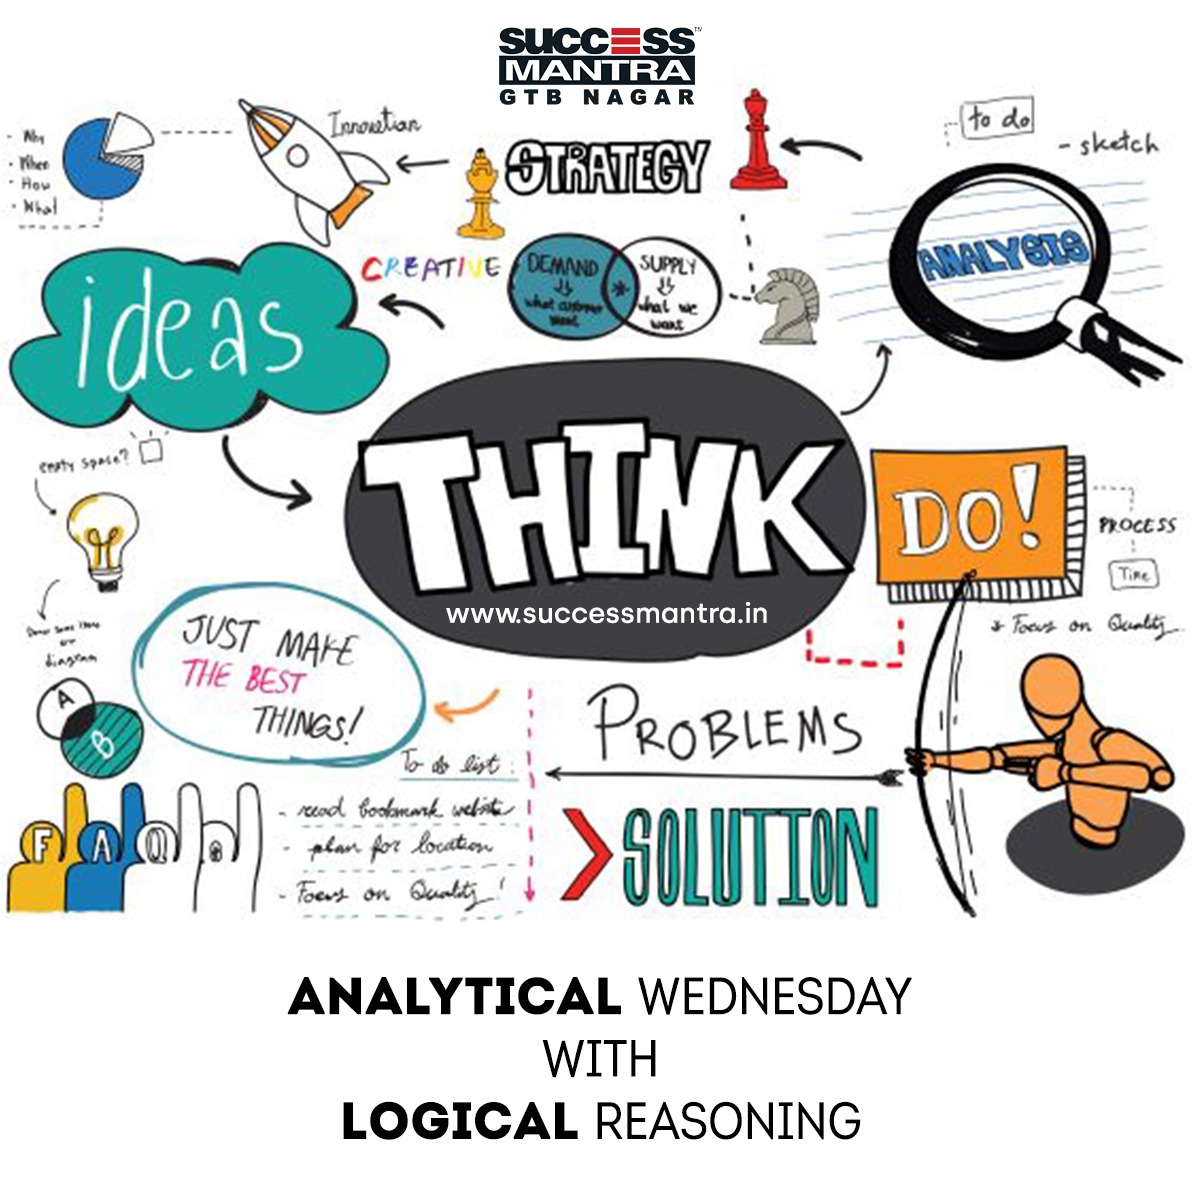 Questions on Logical Reasoning SMLRQ025